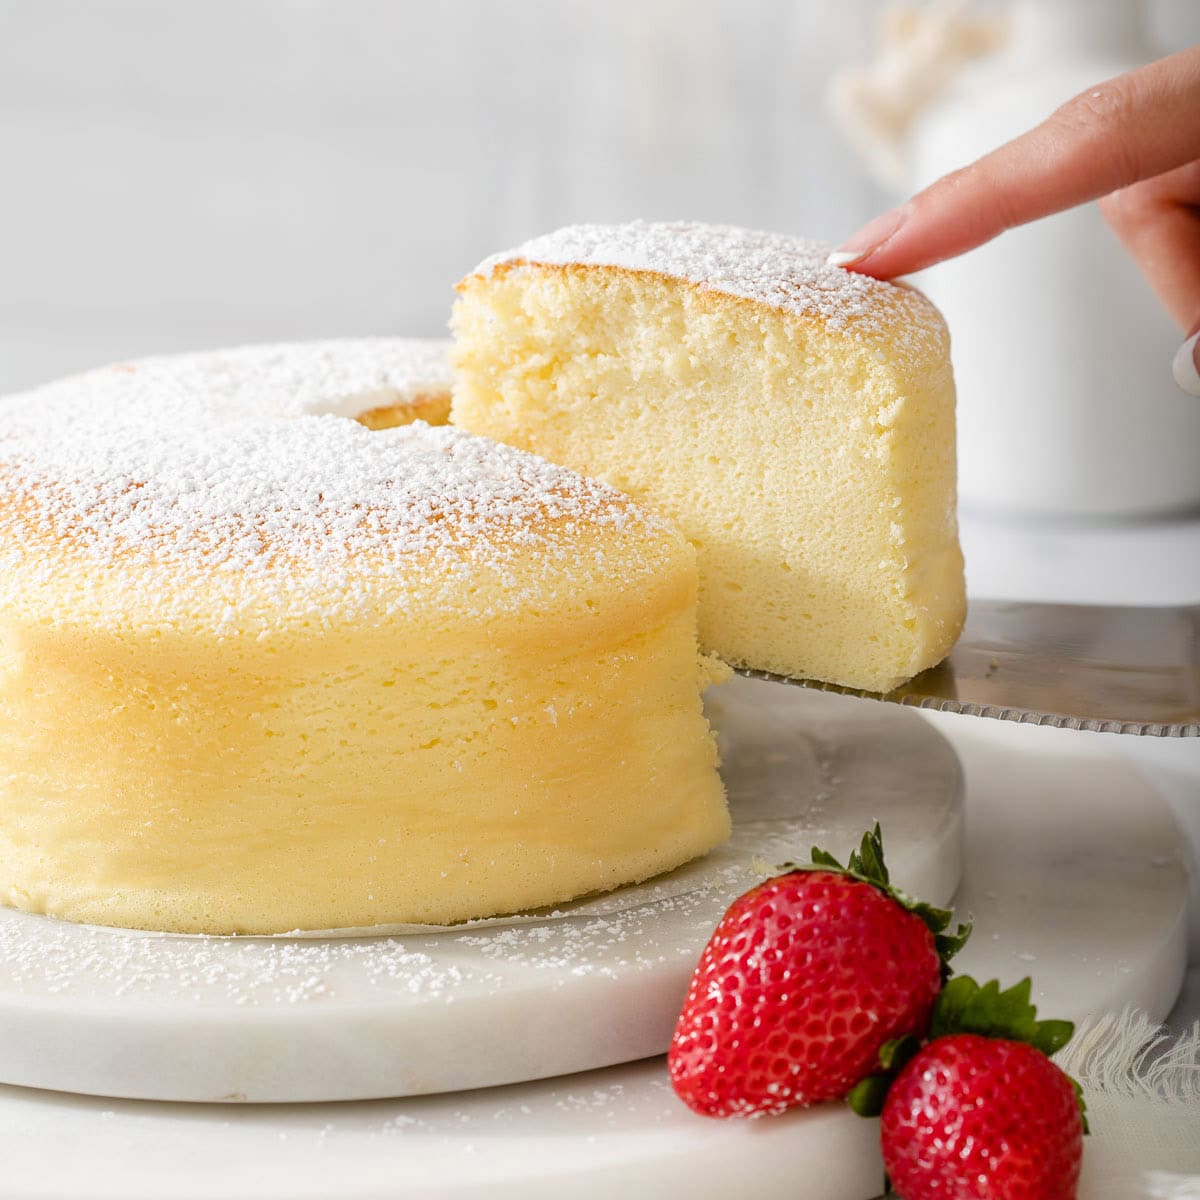 Someone slicing a piece of Japanese cotton cheesecake.